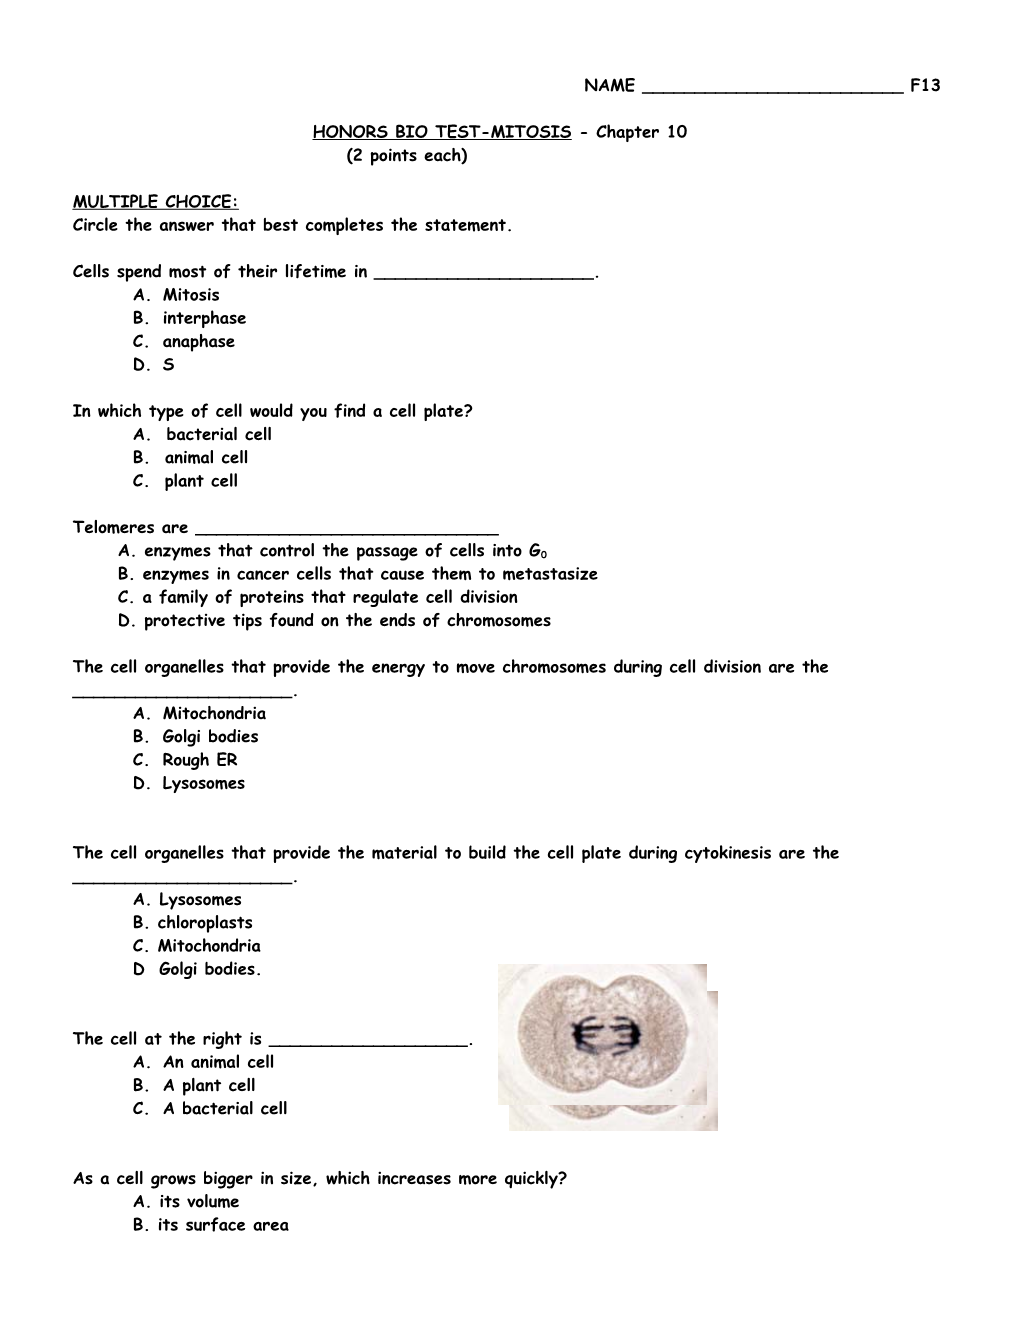 HONORS BIO TEST-MITOSIS - Chapter 10